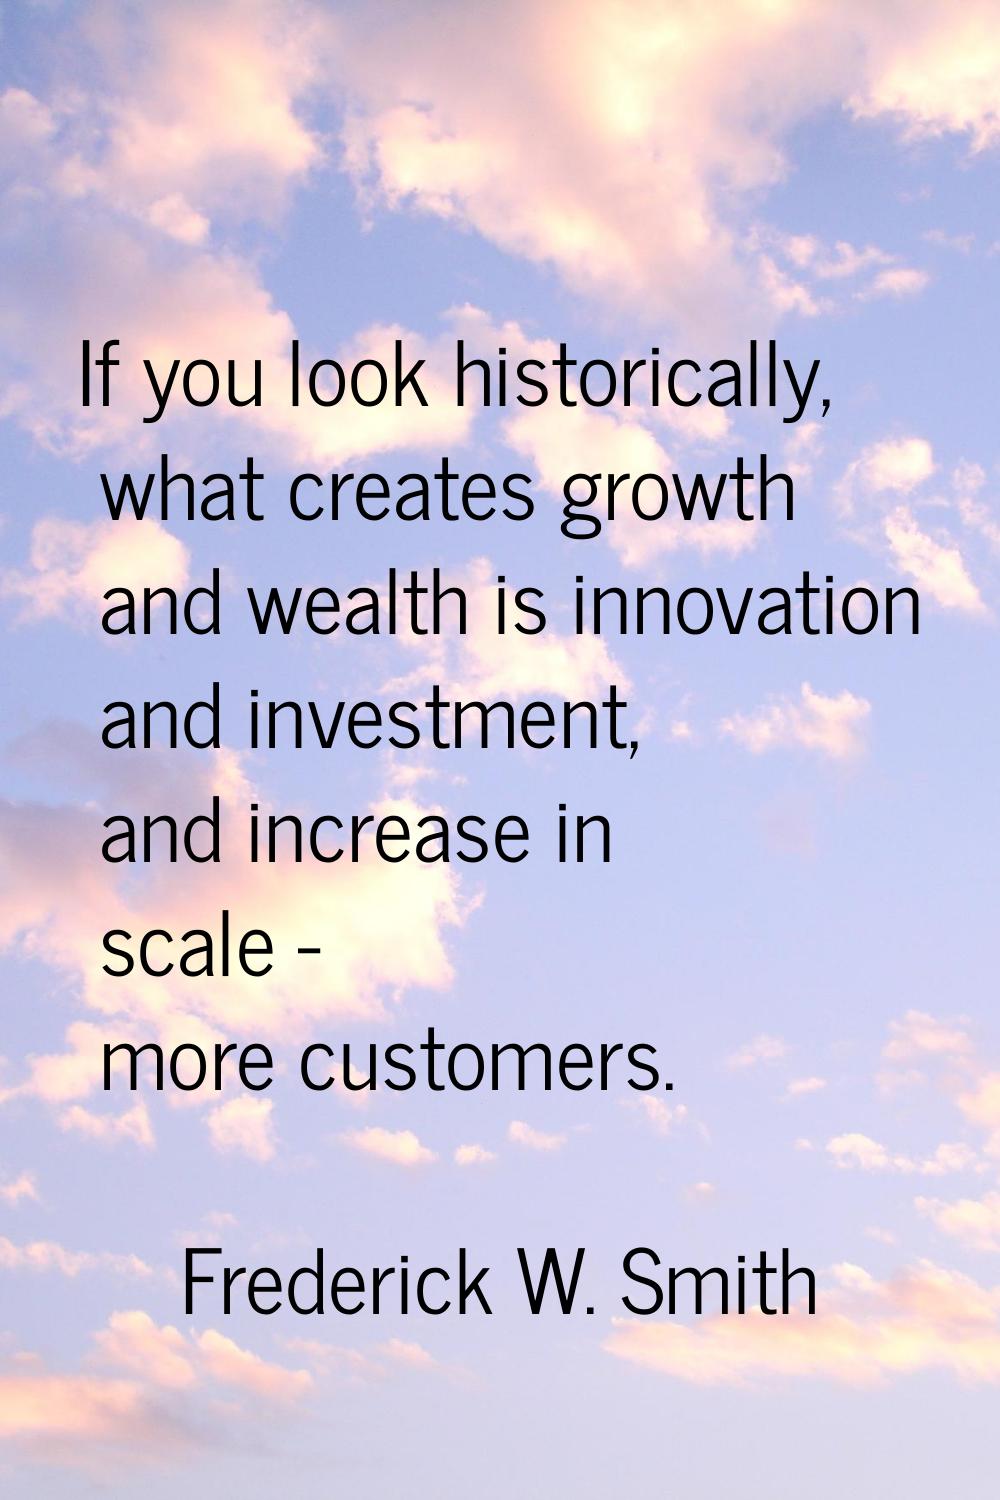 If you look historically, what creates growth and wealth is innovation and investment, and increase